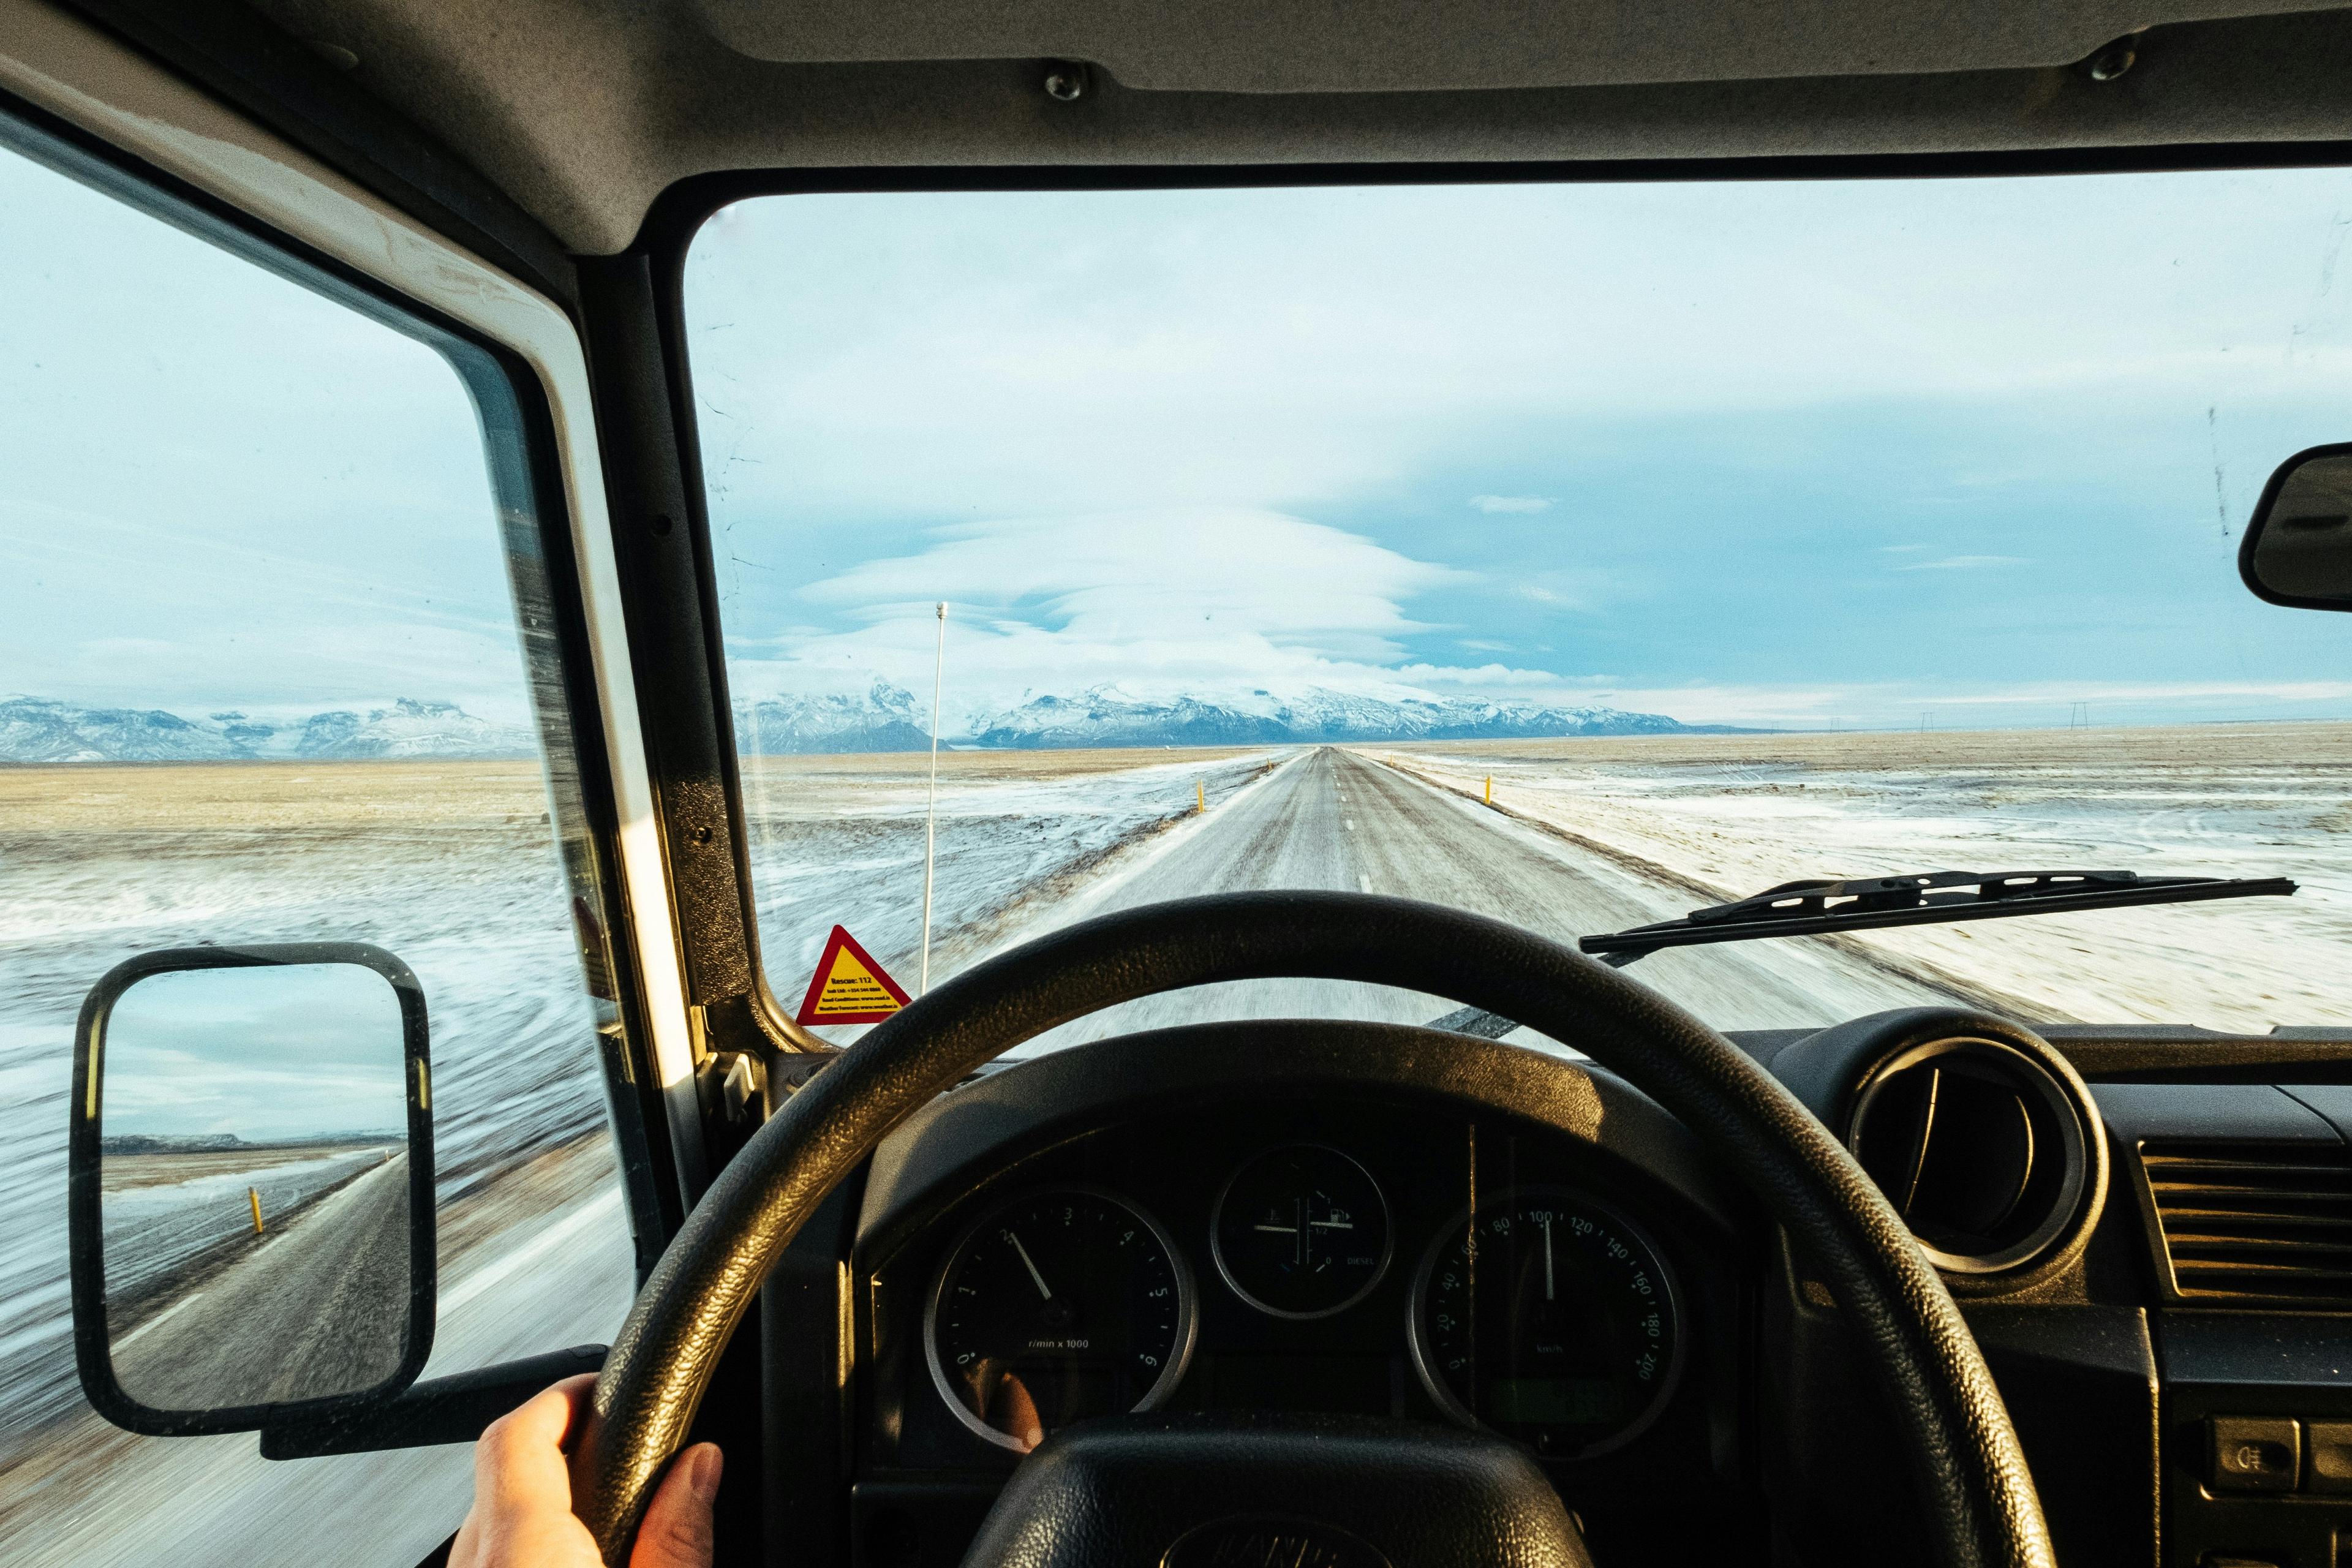 View from a vehicle's driver's perspective on a snowy road stretching into the distance with mountains and a clear sky ahead.